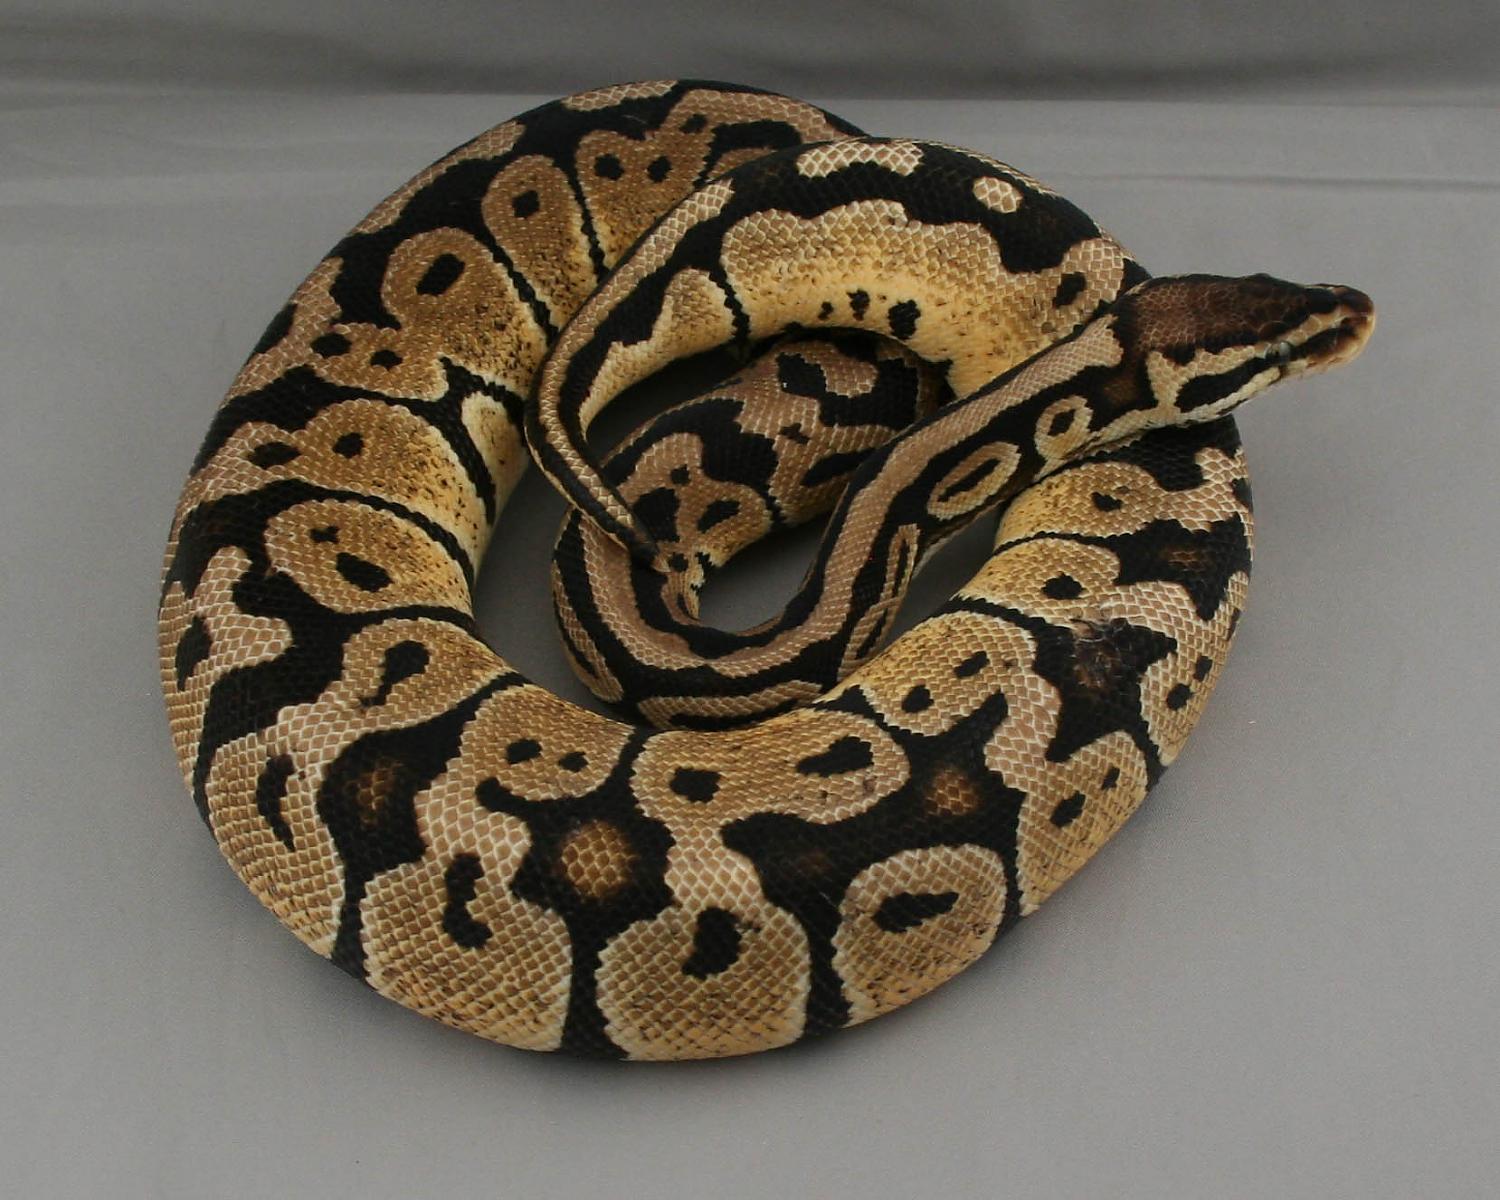 2012 female pastel chocolate 6 trimmed